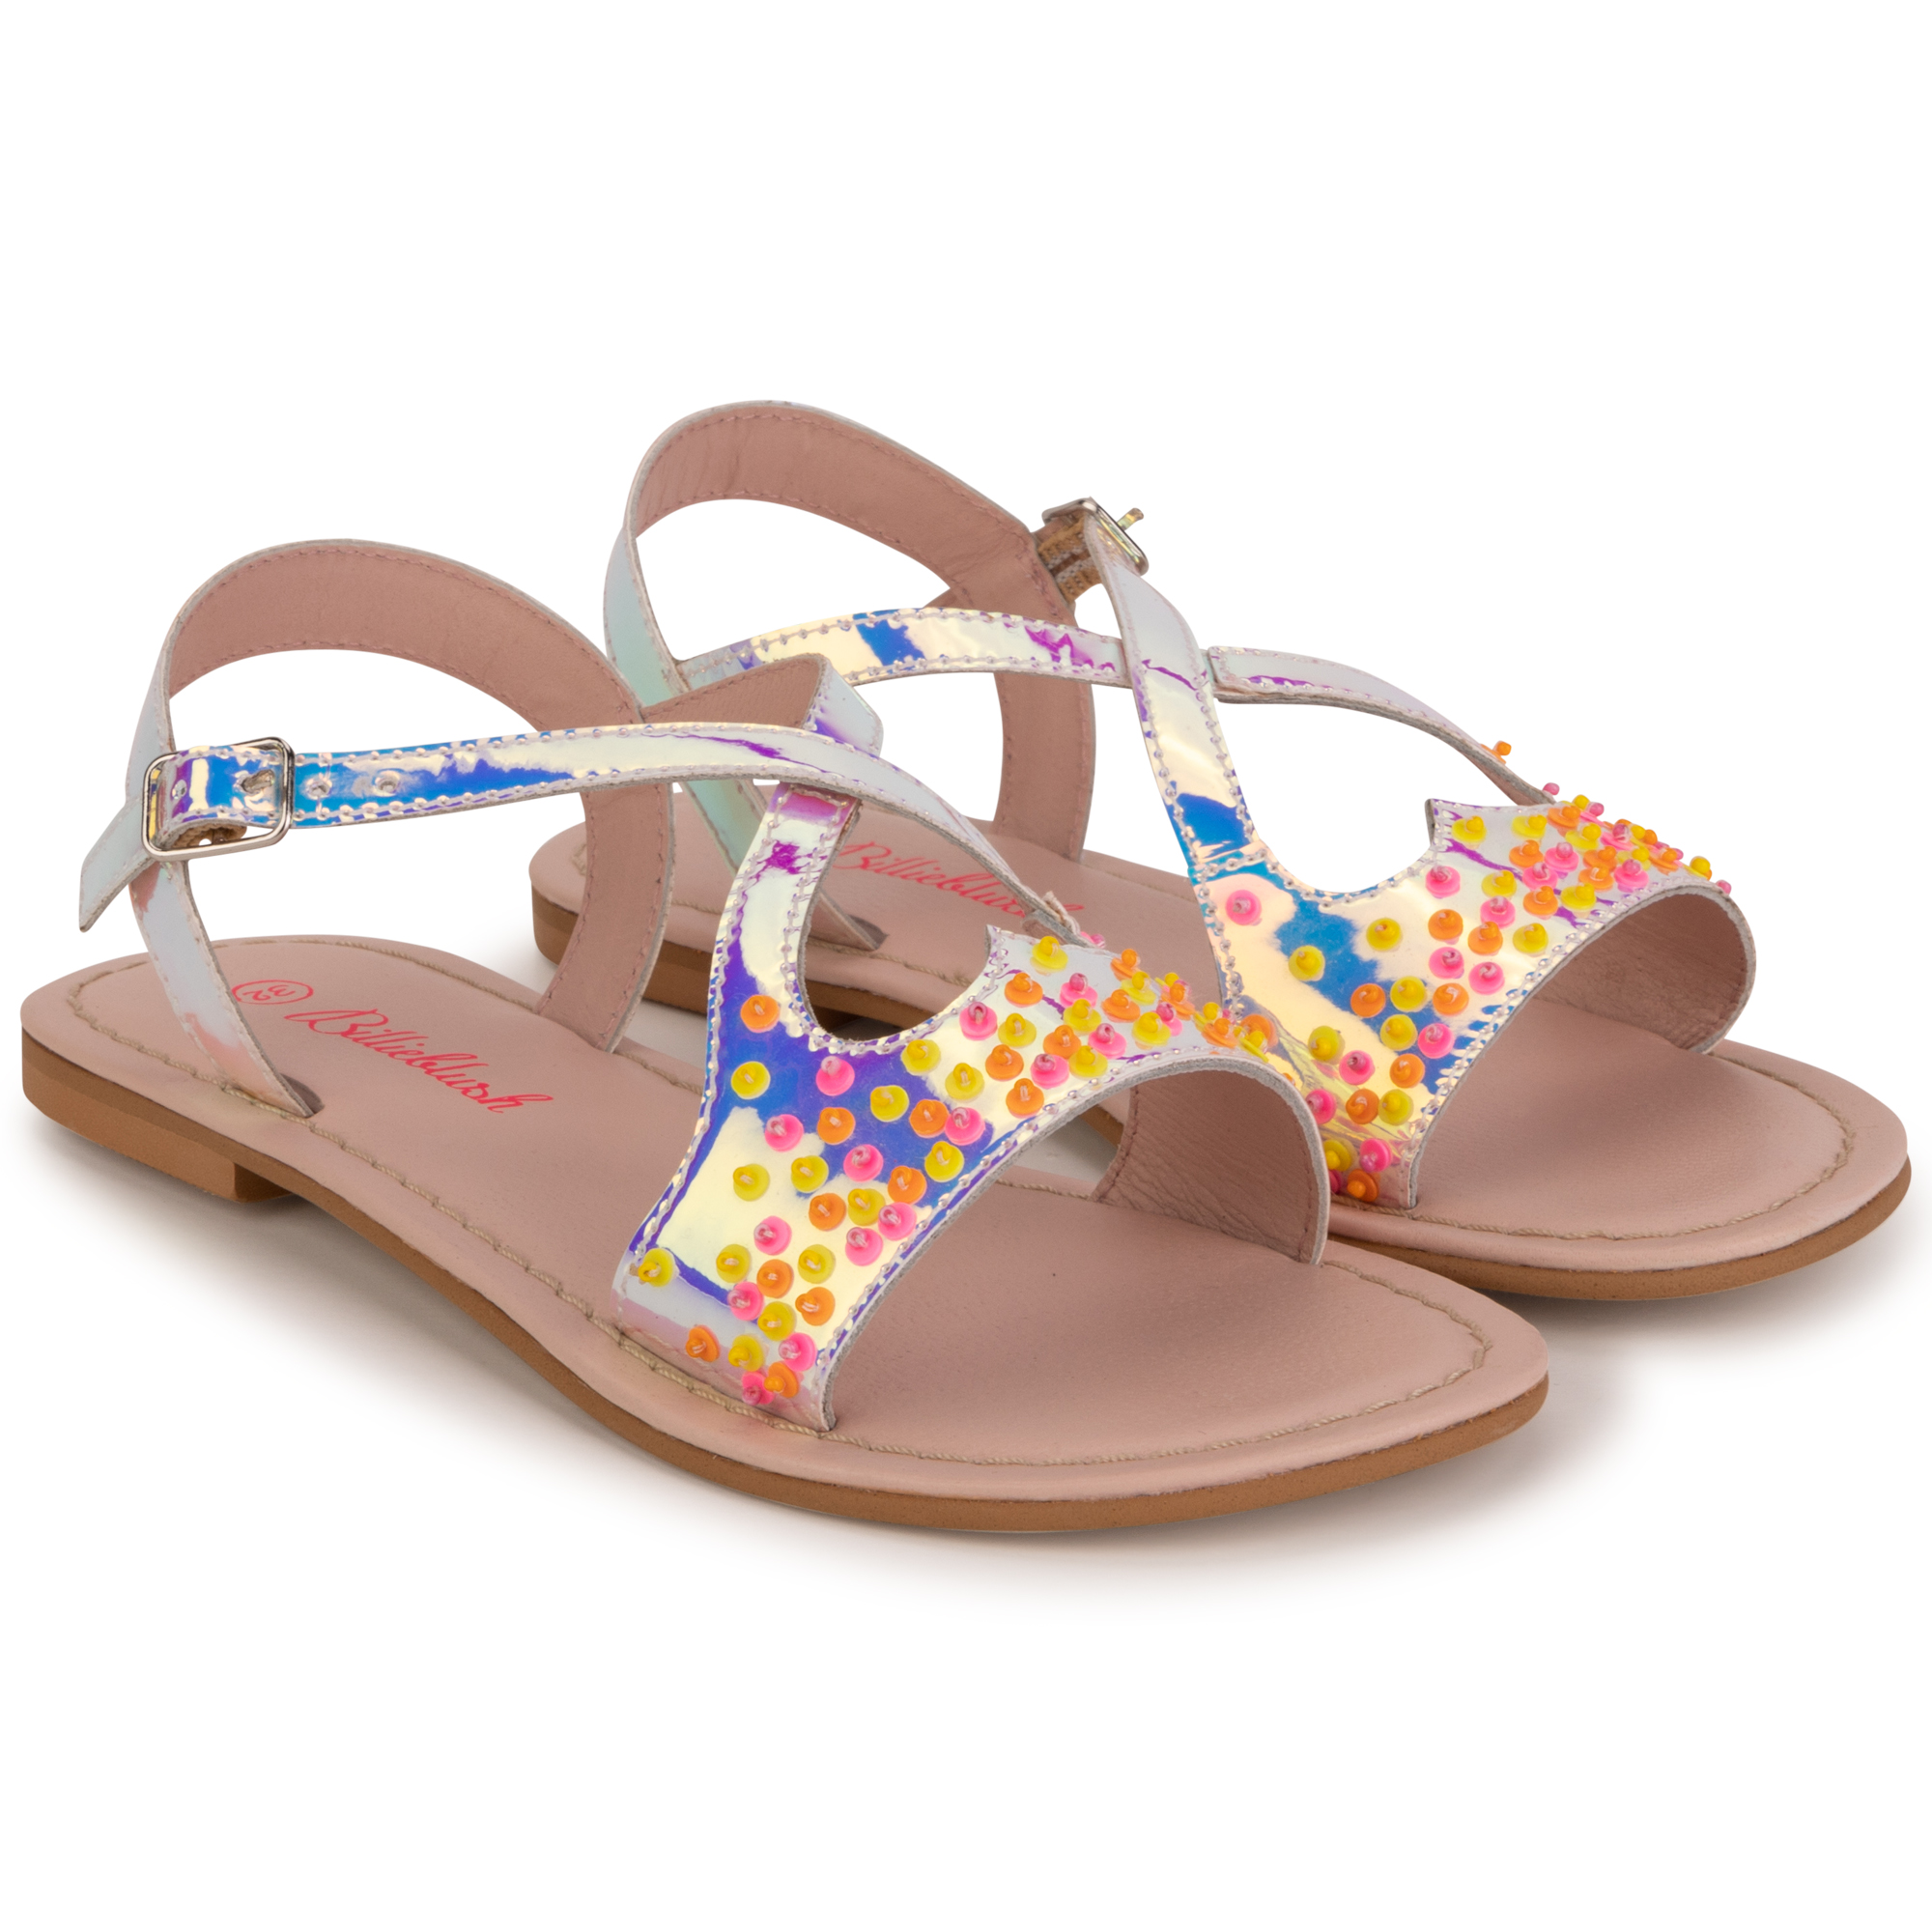 Couture buckled sandals BILLIEBLUSH for GIRL